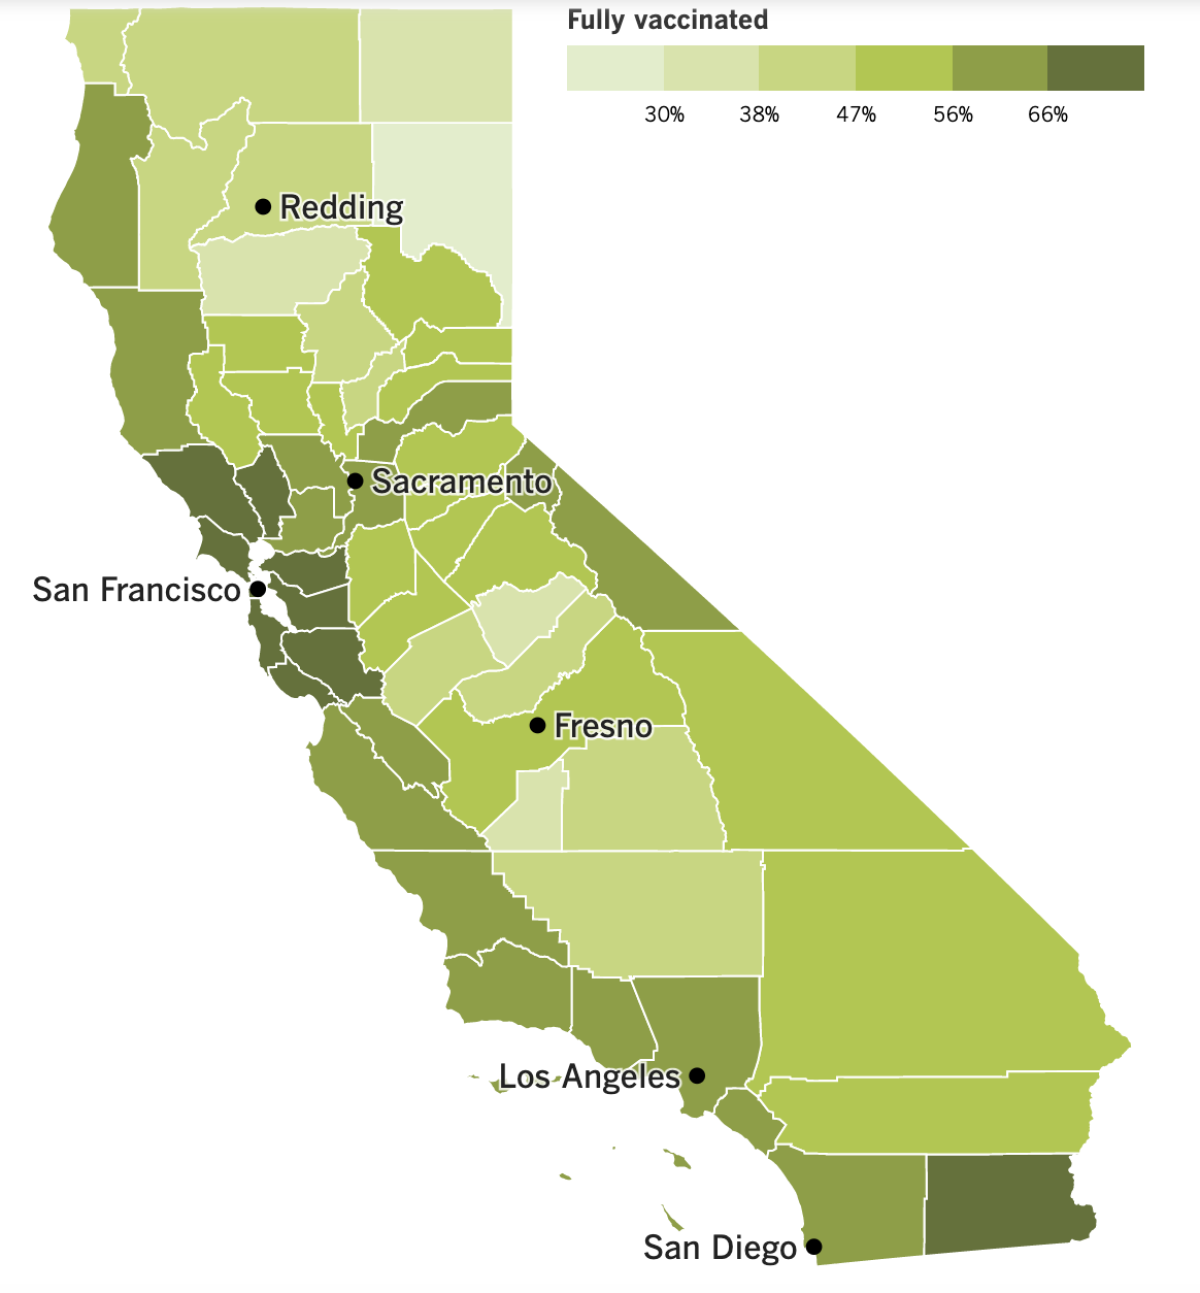 This map shows California's vaccination progress by county.